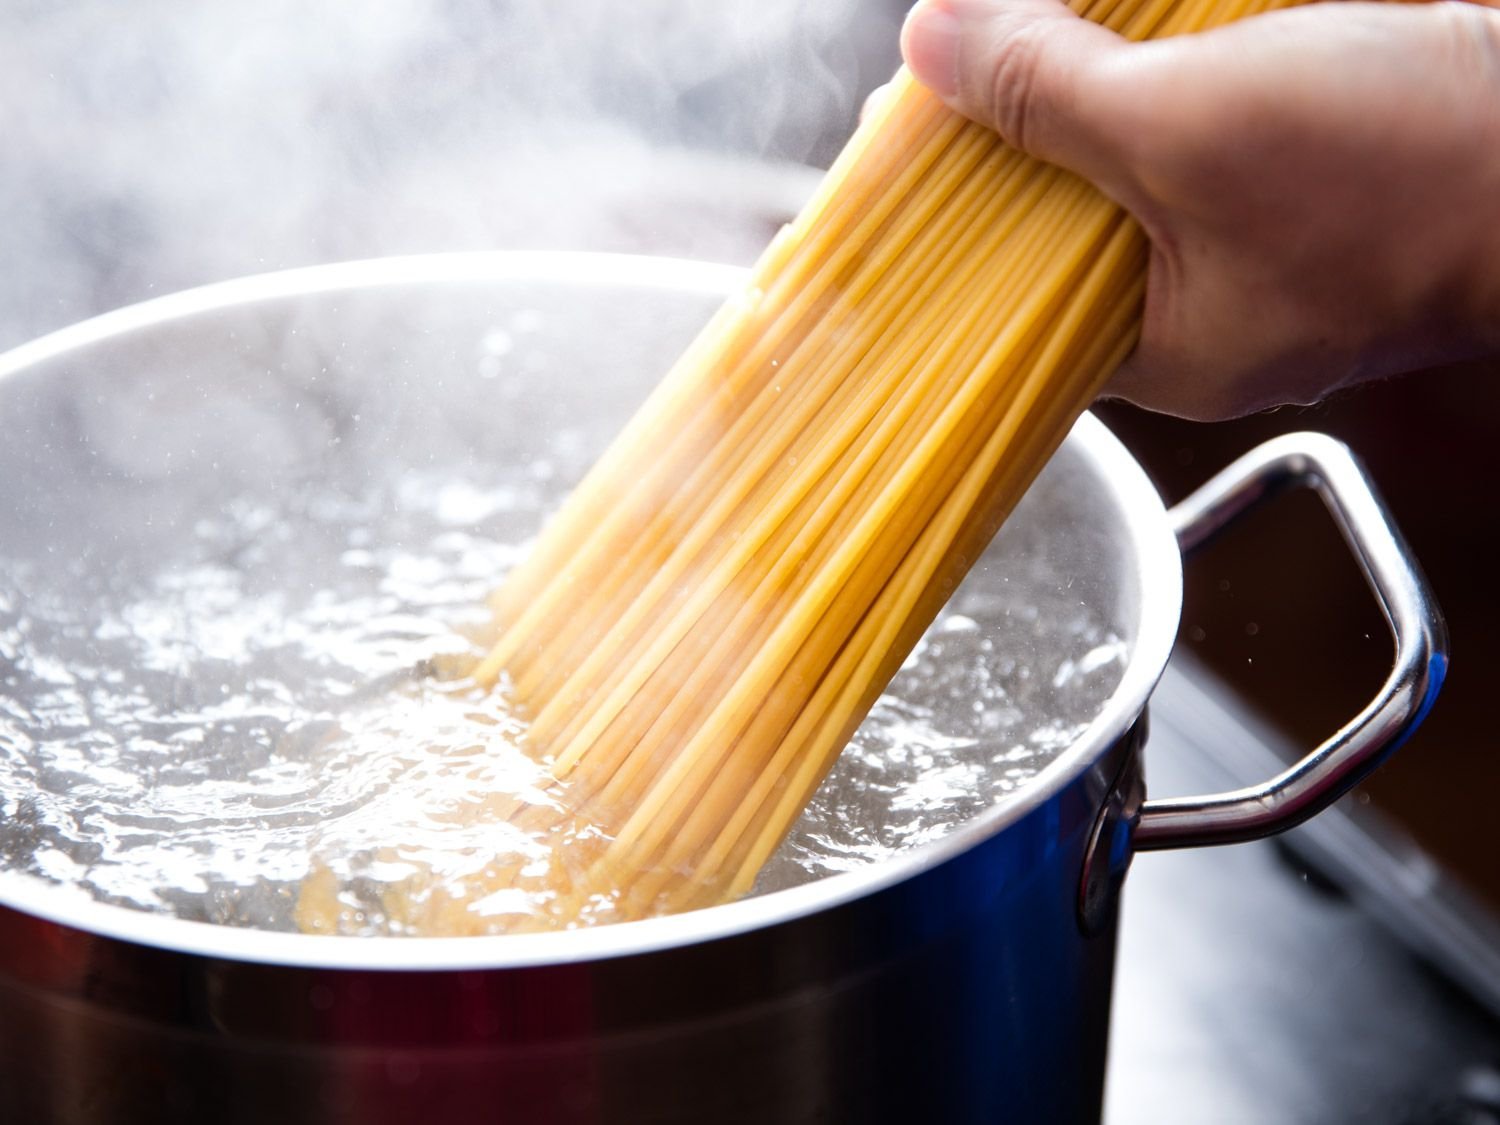 How Salty Should Pasta Water Be?